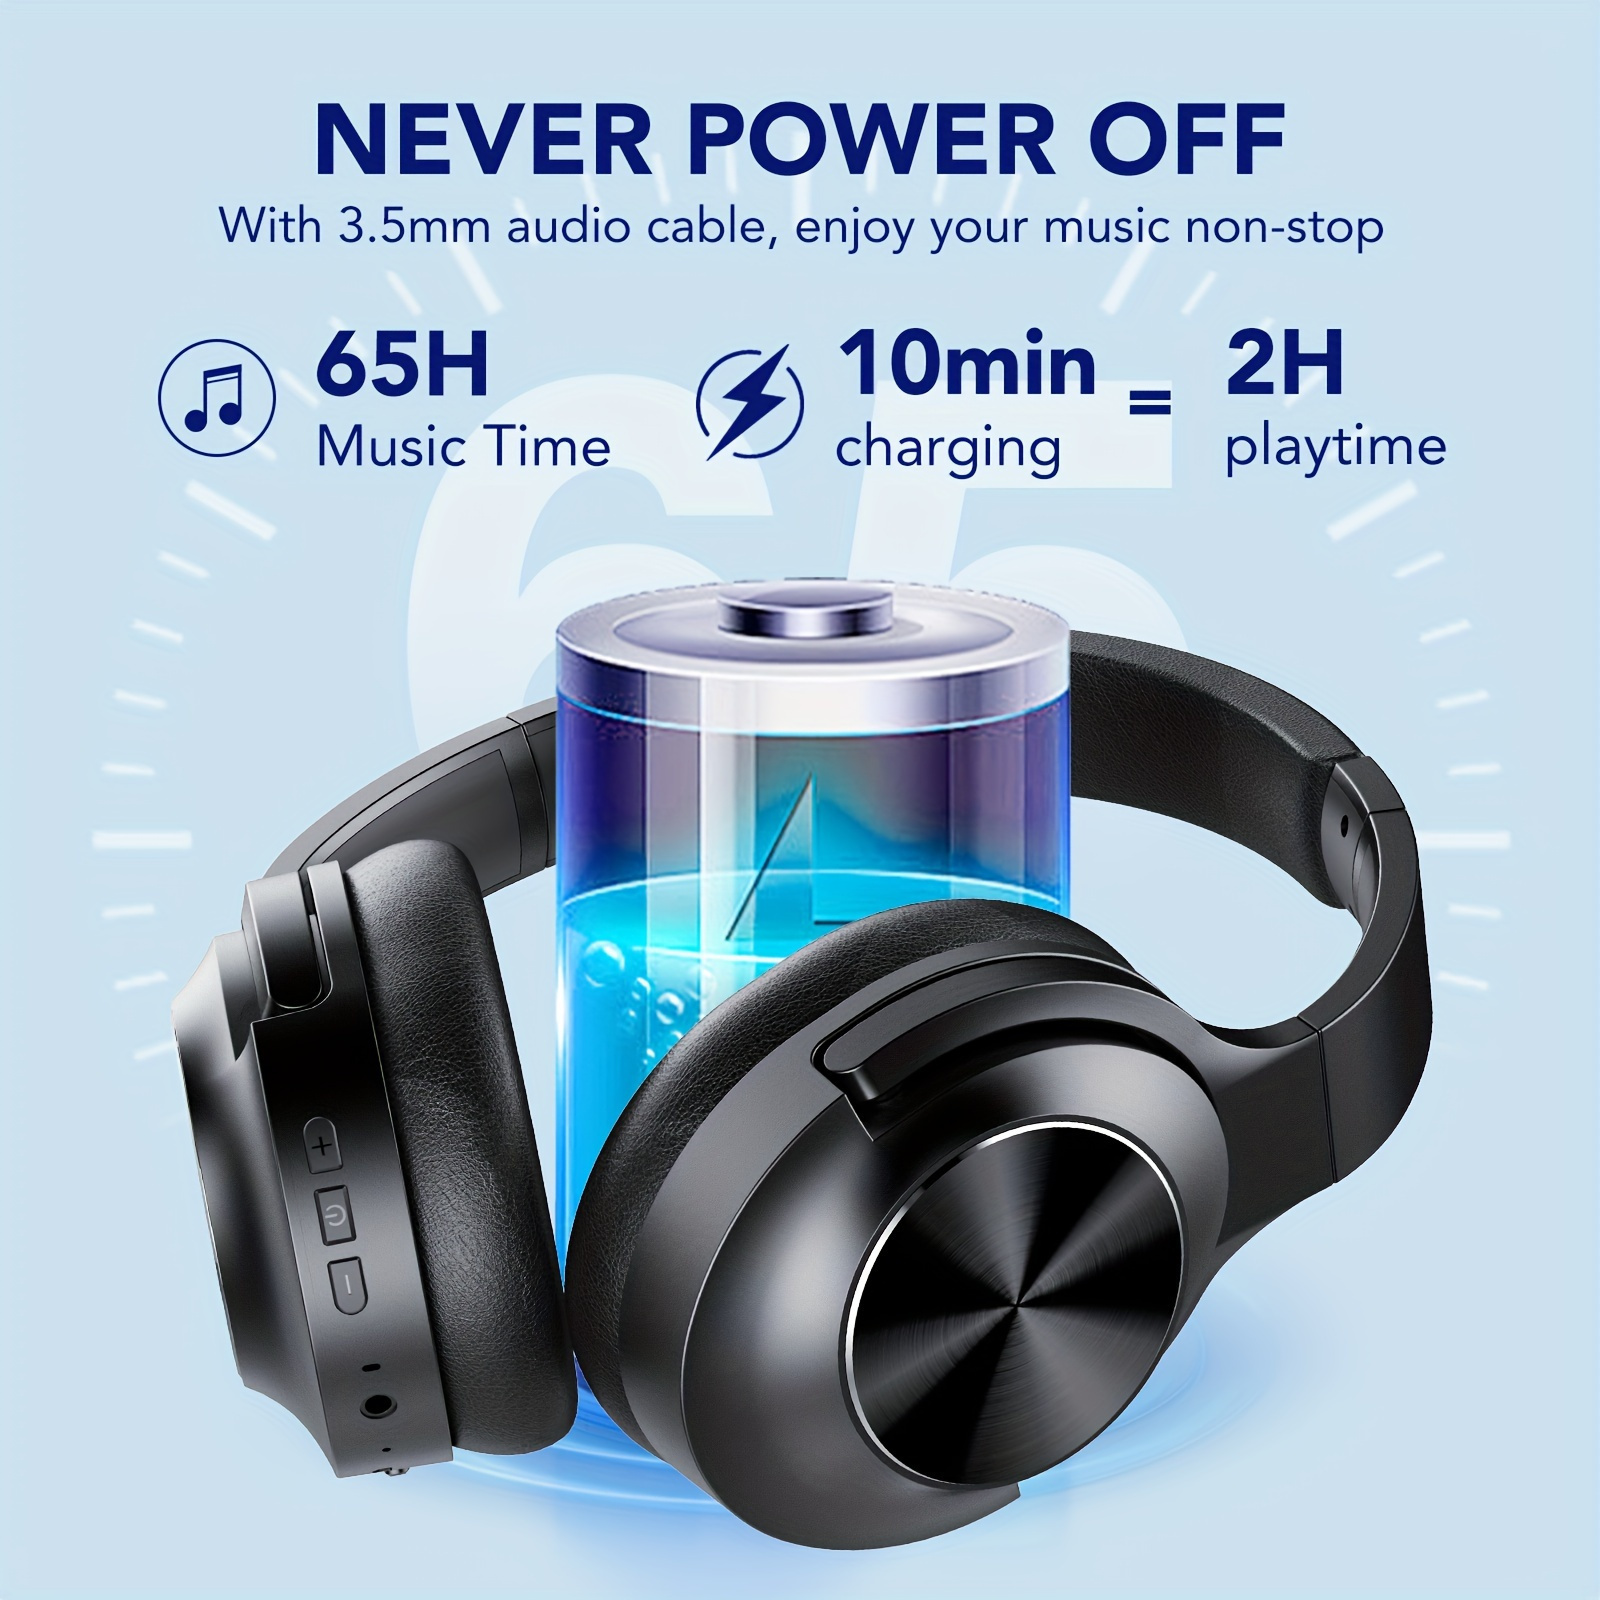 

Ikt 805 Active Noise Cancelling Headphones Wireless Headphones With Rich Bass, Clear Calls, 65 Hours Playtime, Comfort Fit, Black